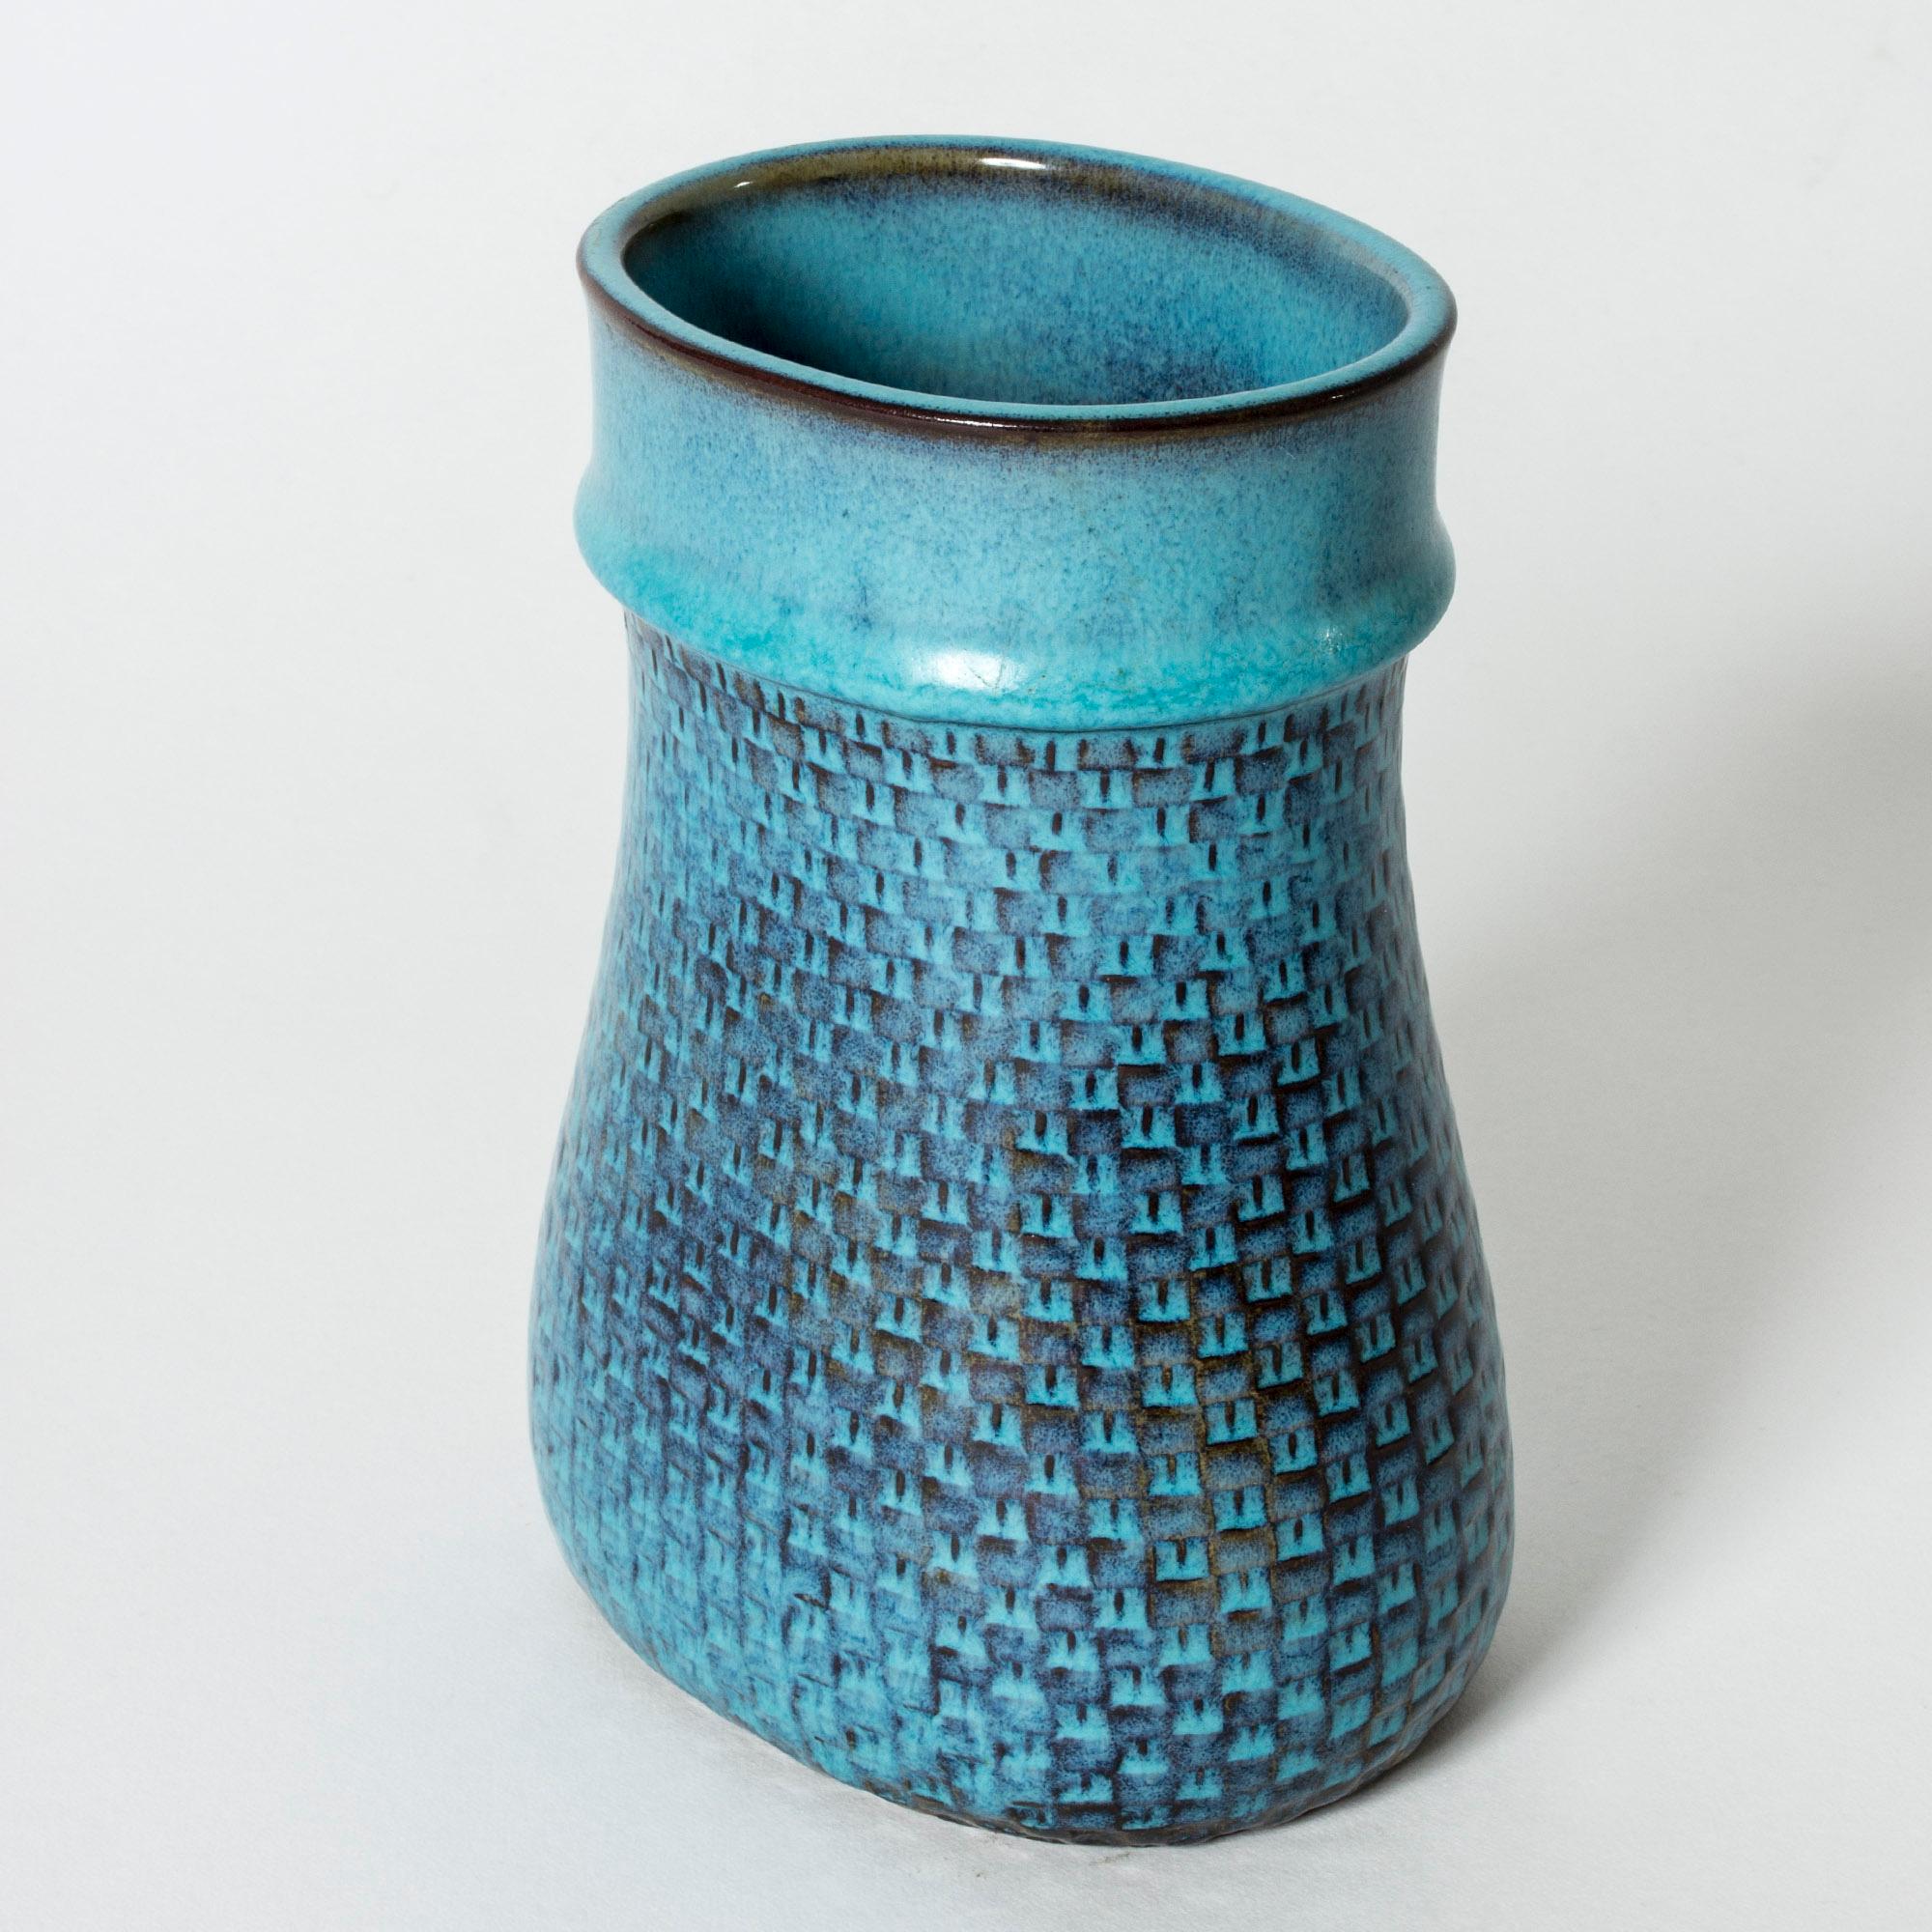 Beautiful, unique stoneware vase by Stig Lindberg in a whimsical pouchy form and with a striking graphic pattern. Beautiful blue and rich brown glaze shifting over the body.